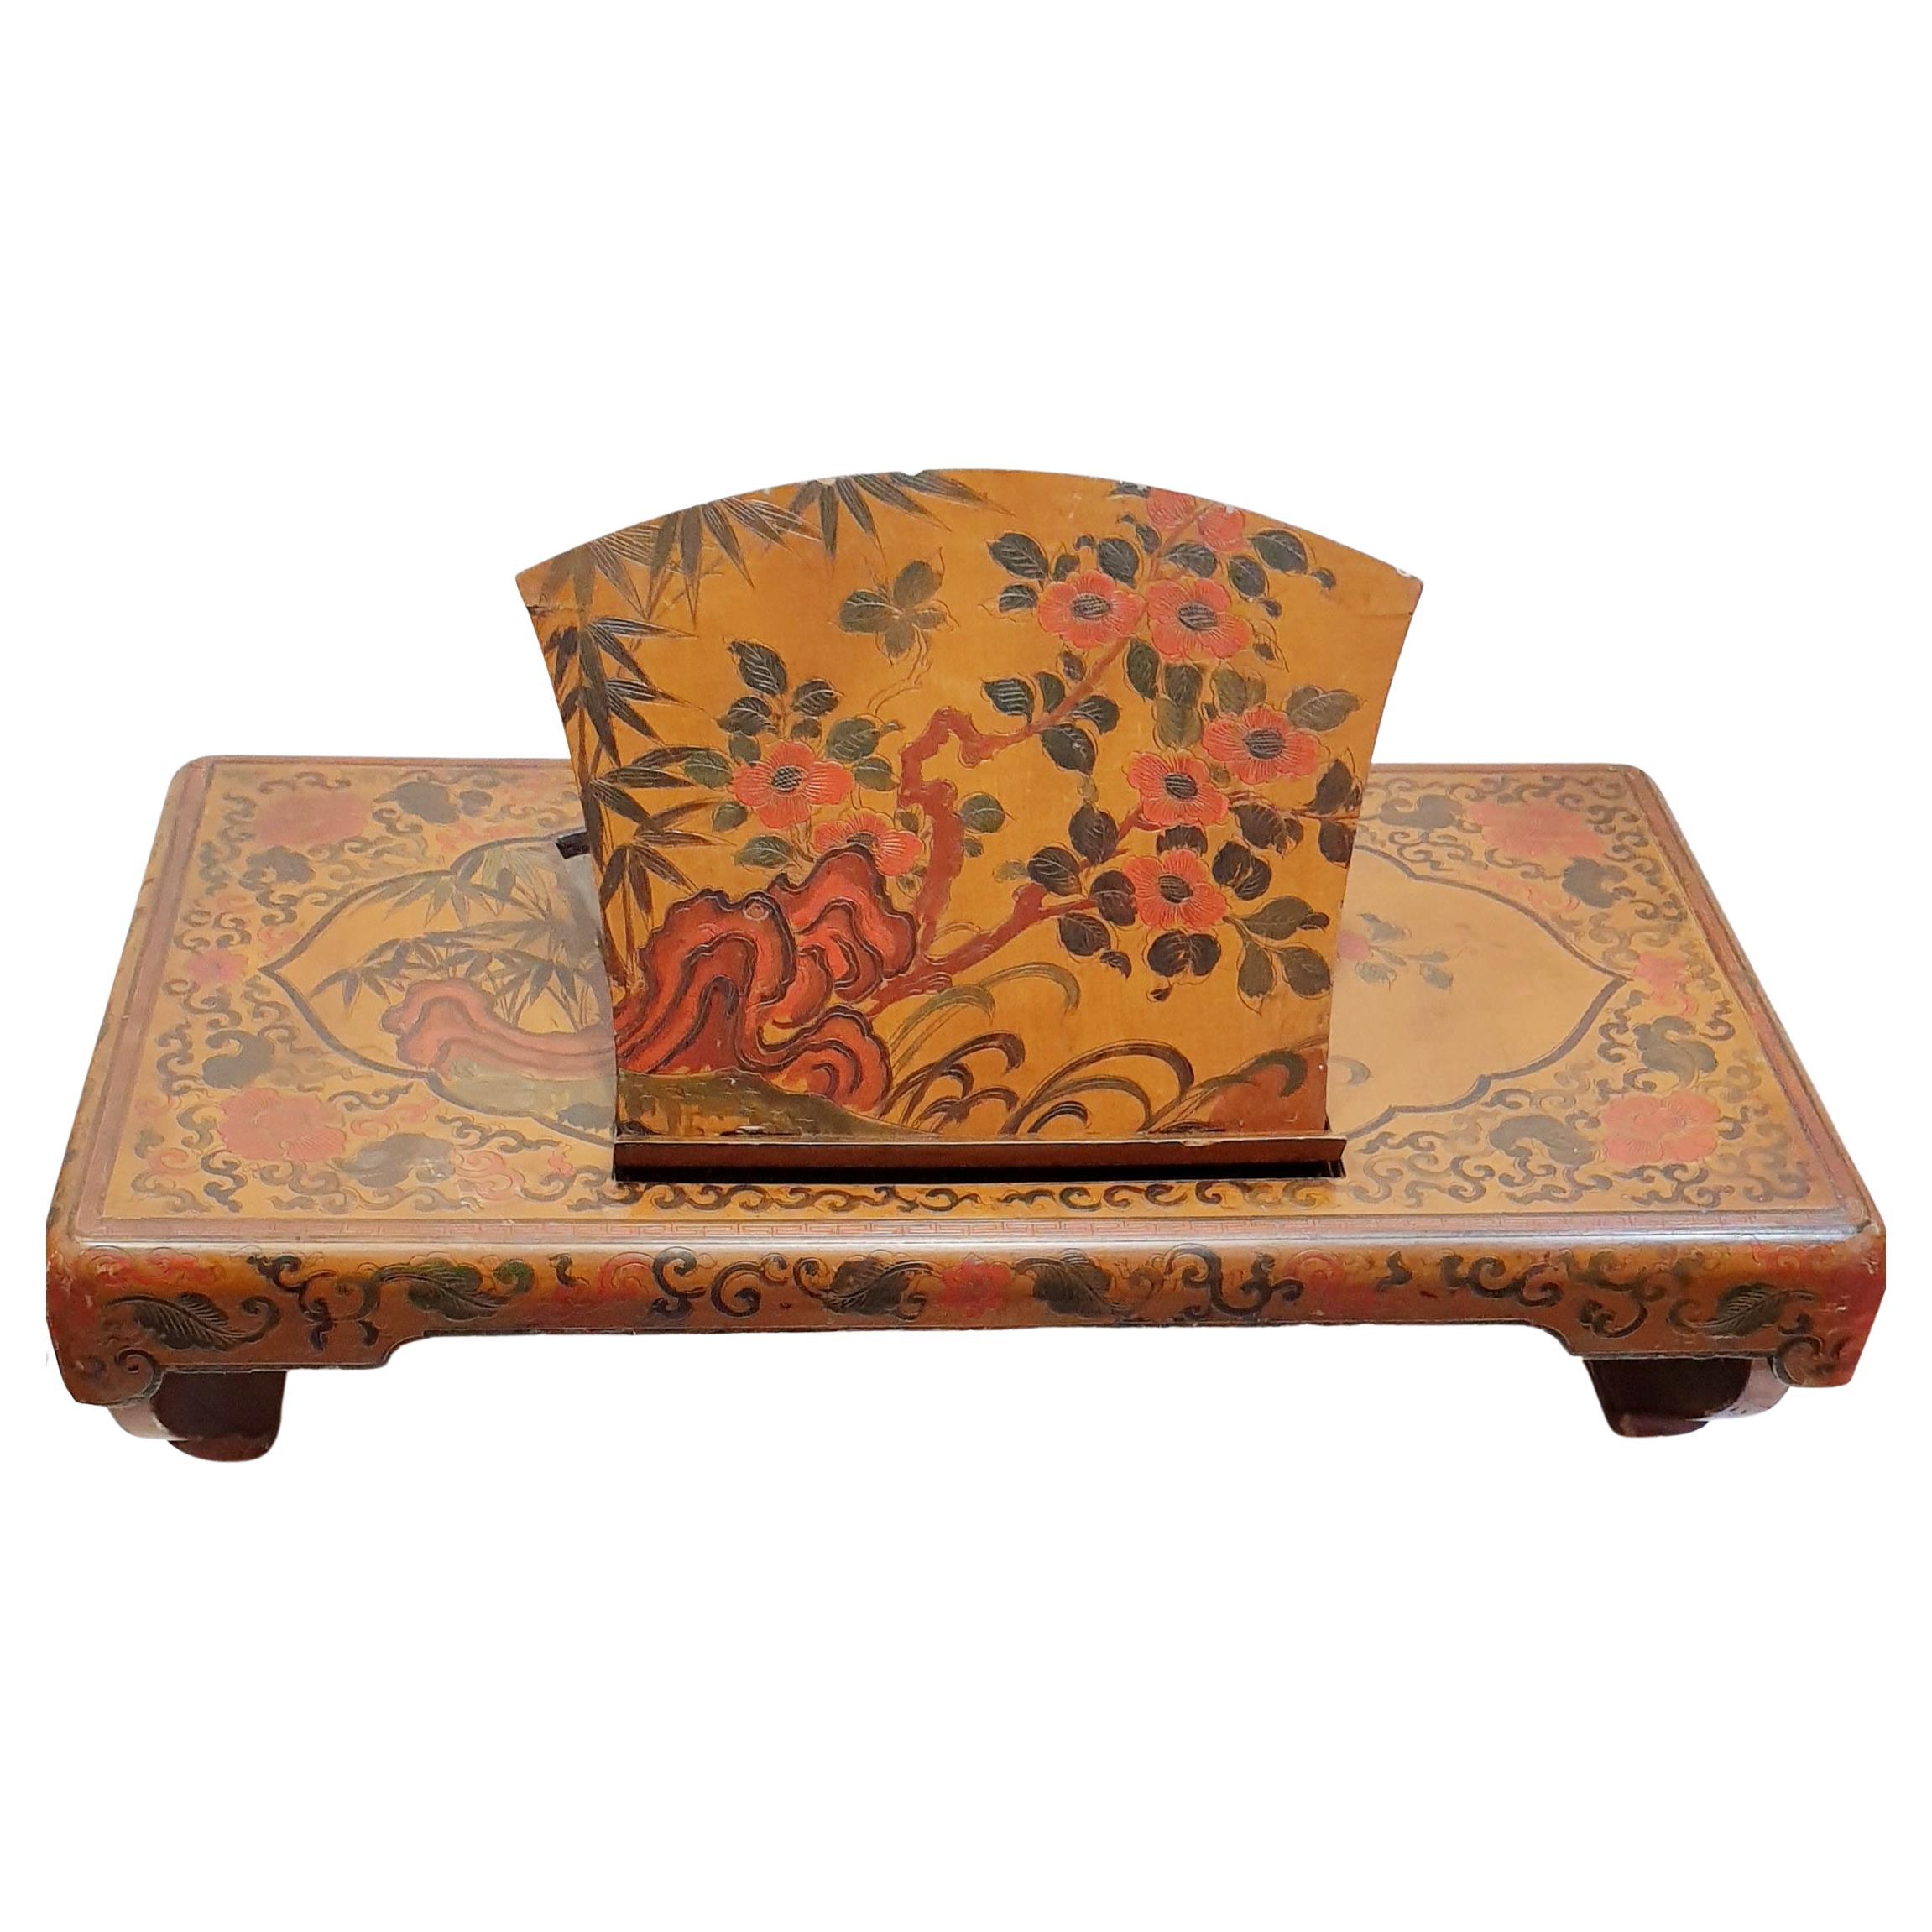 Chinese Lacquered Book Reading or Book Stool Early 19th Century For Sale